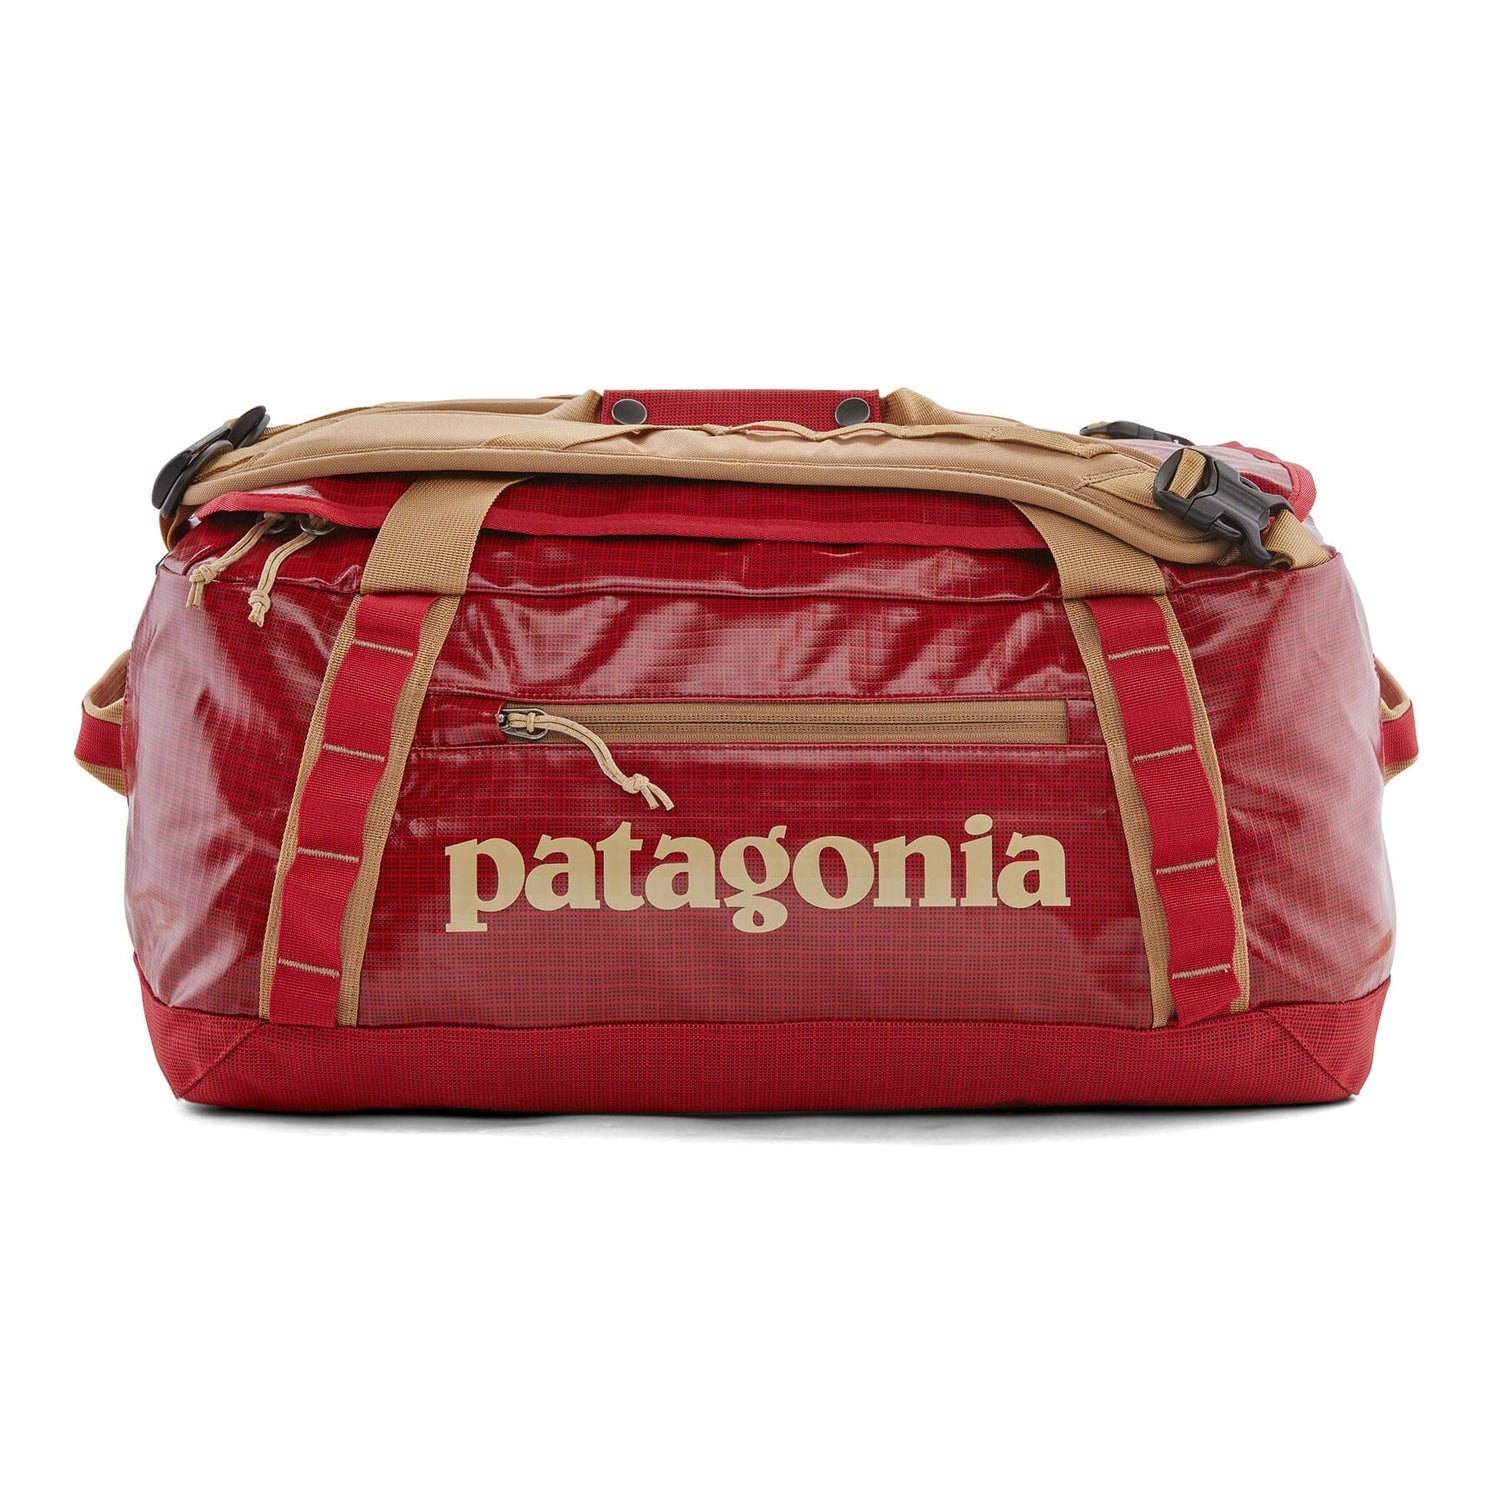 Patagonia Black Hole® Duffel Bag 40L - 100% Recycled Polyester Touring Red Bags